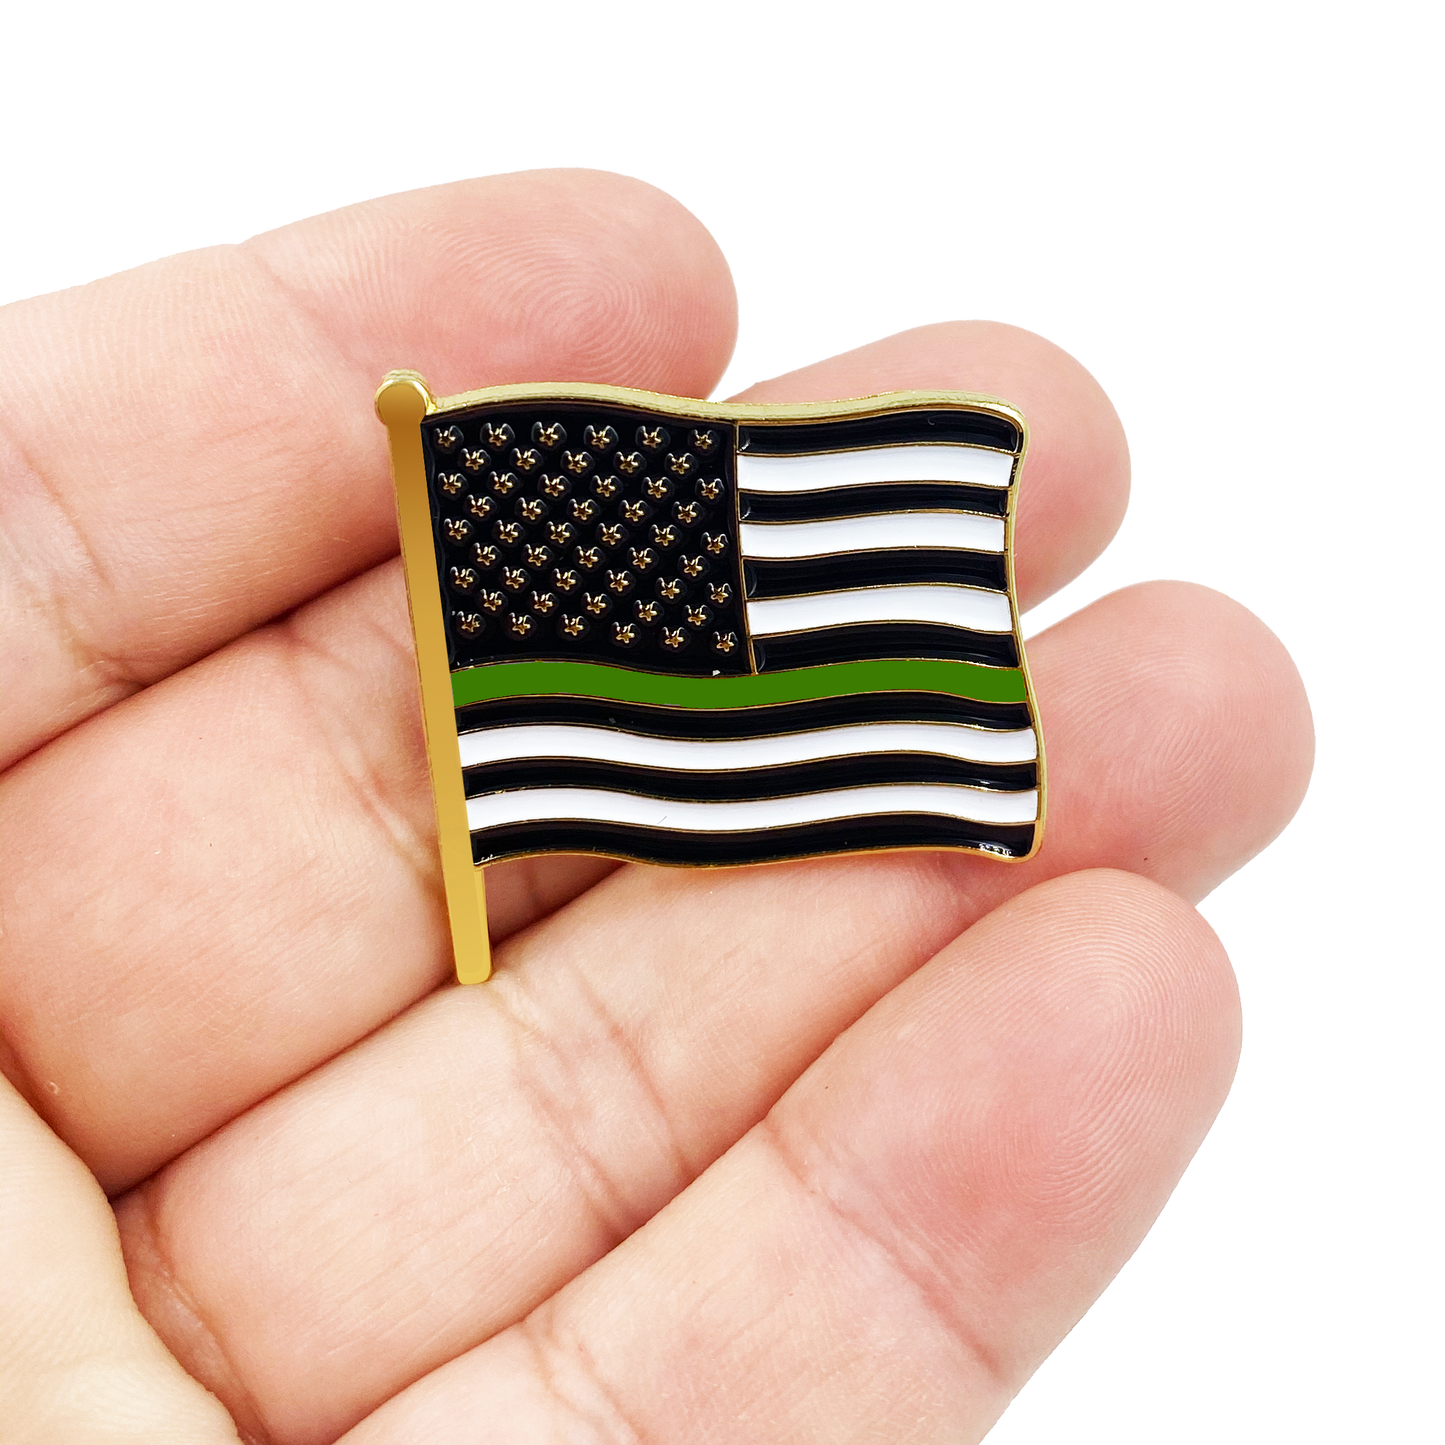 Thin Green Line American Waving Flag Lapel Pin 1.25" with 2 pin posts and deluxe clasps, U.S. Stars are Stripes, Old Glory US USA Border Patrol Marines Army Deputy Sheriff